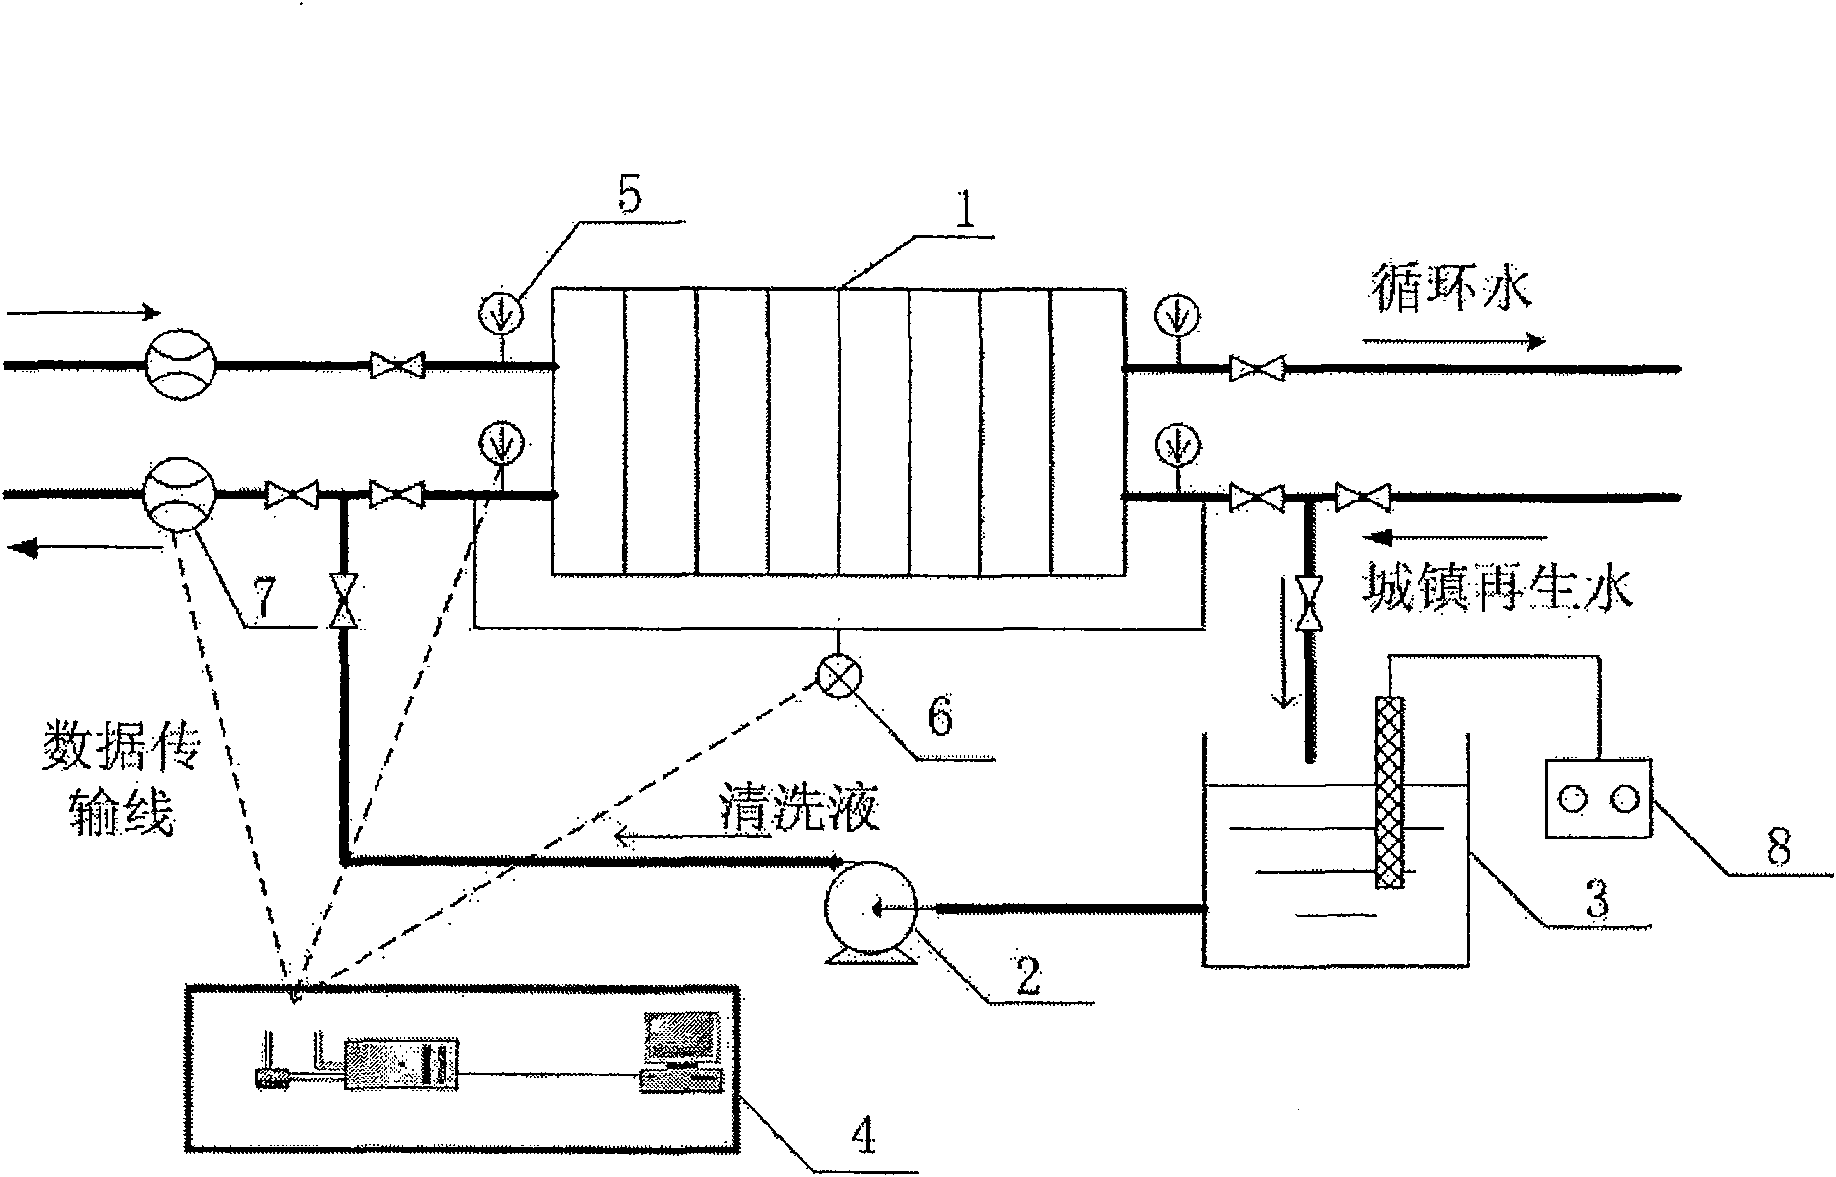 In-position cleaning method for town regenerated water plate type heat exchanger